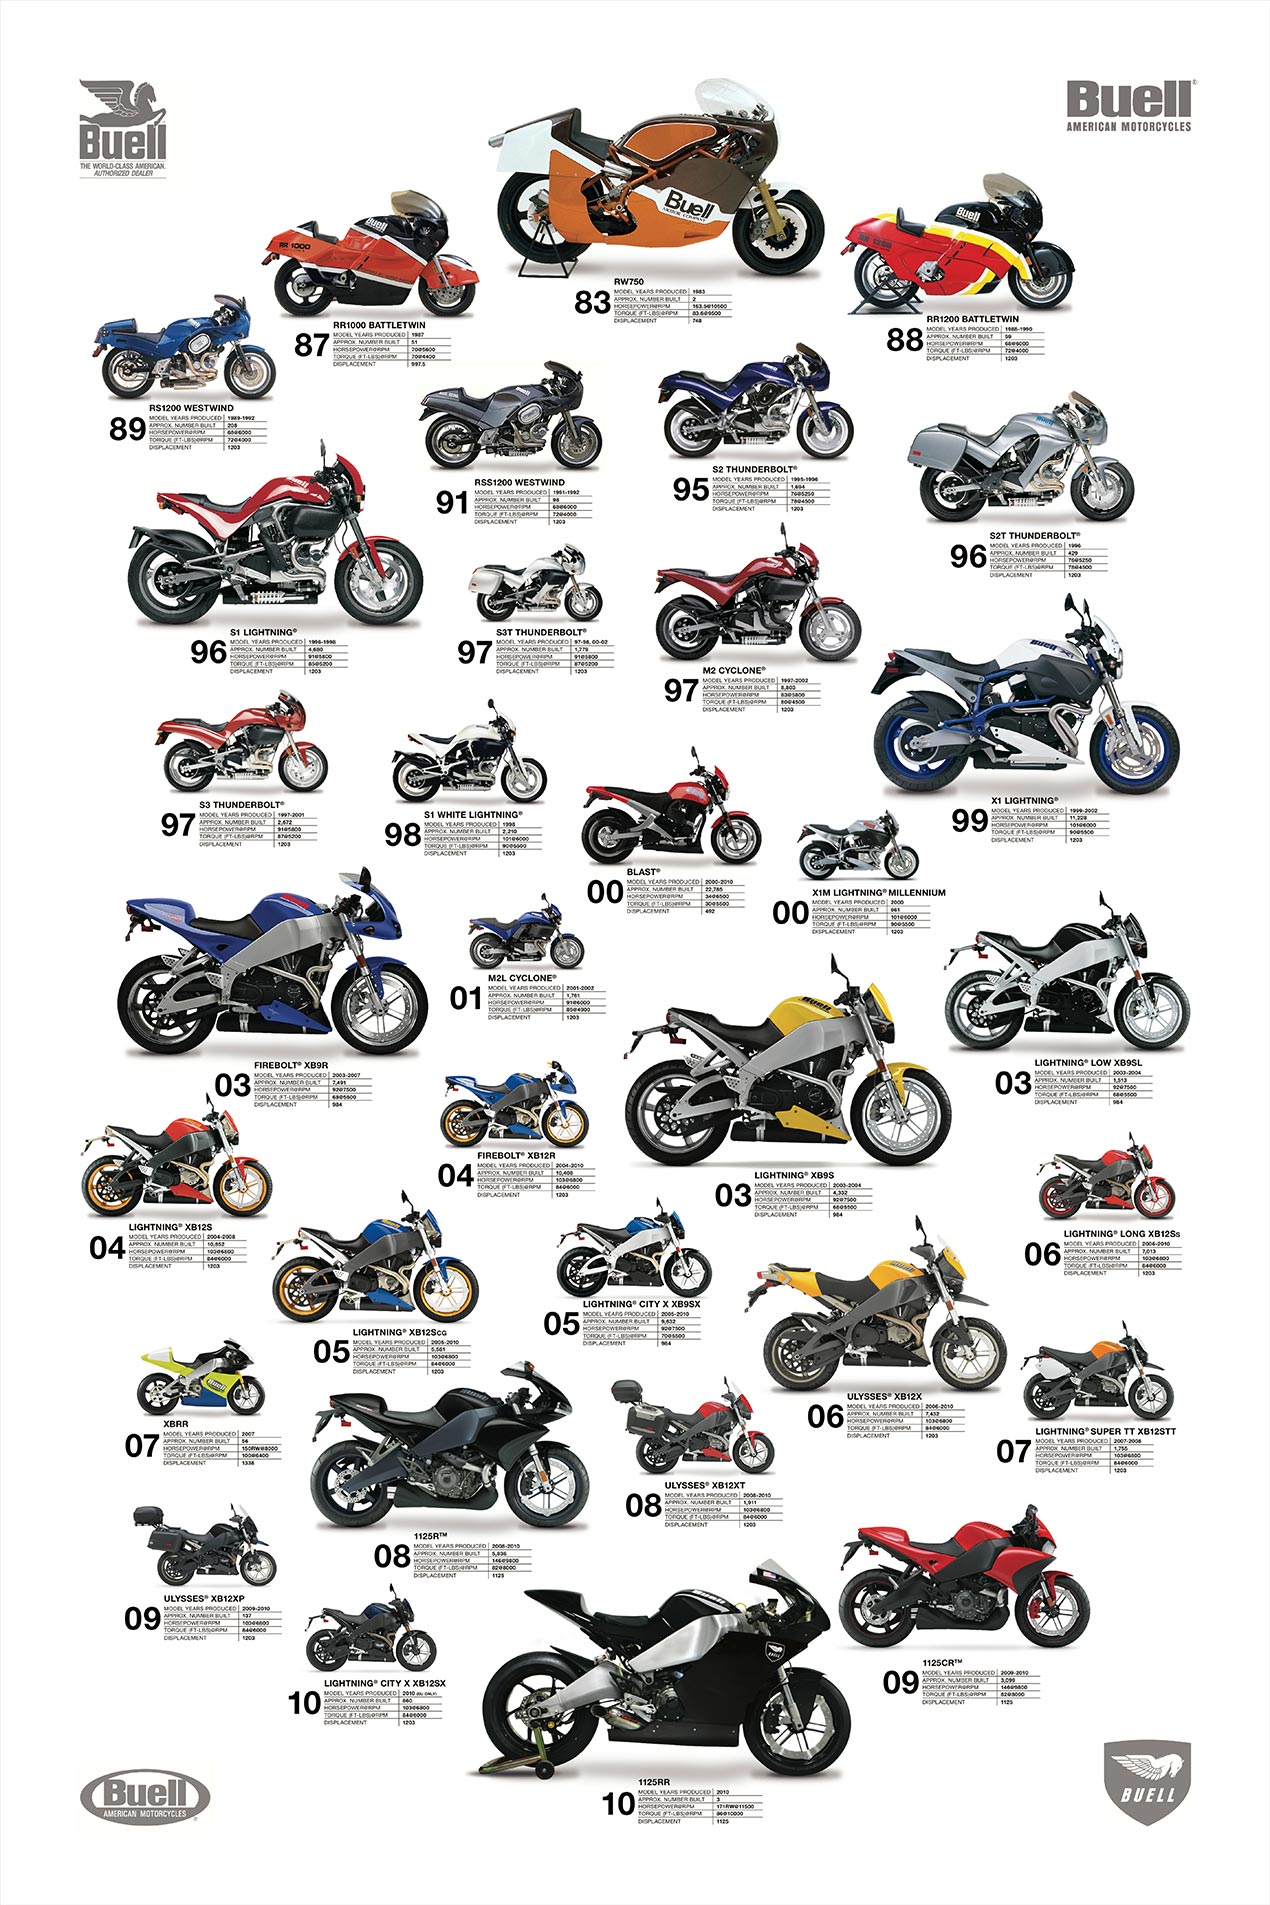 buell-motorcycles-poster.jpg